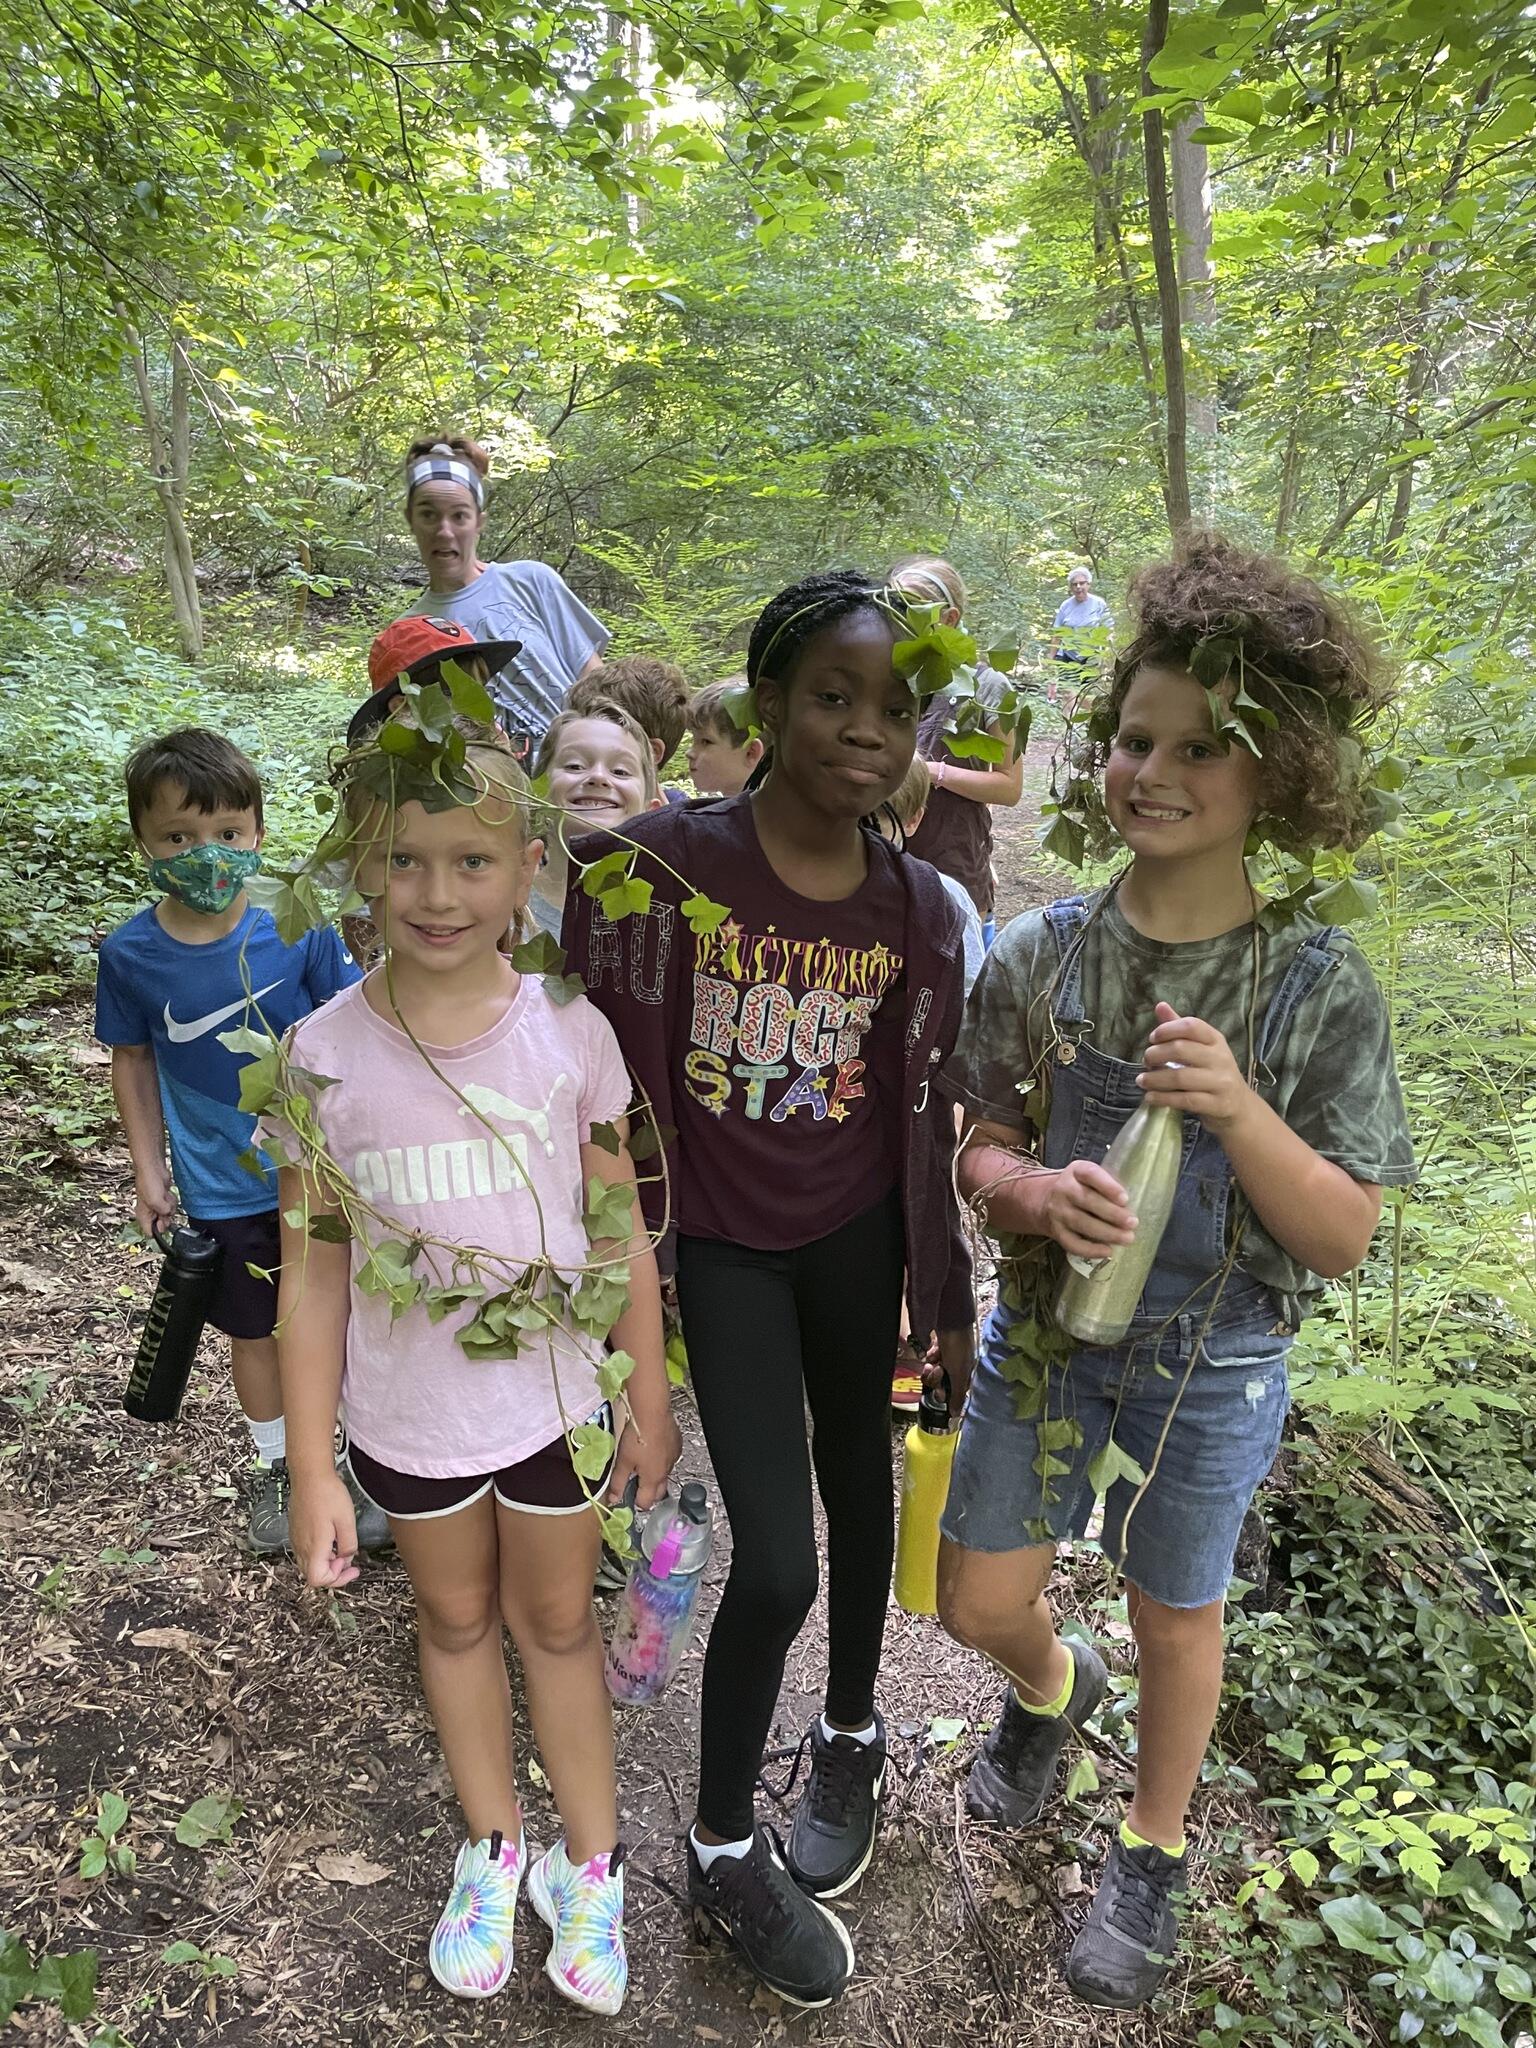 A group of children walk towards the viewer along a wooded path, smiling and wearing strands of English Ivy around them as necklaces, crowns, and general decorations.